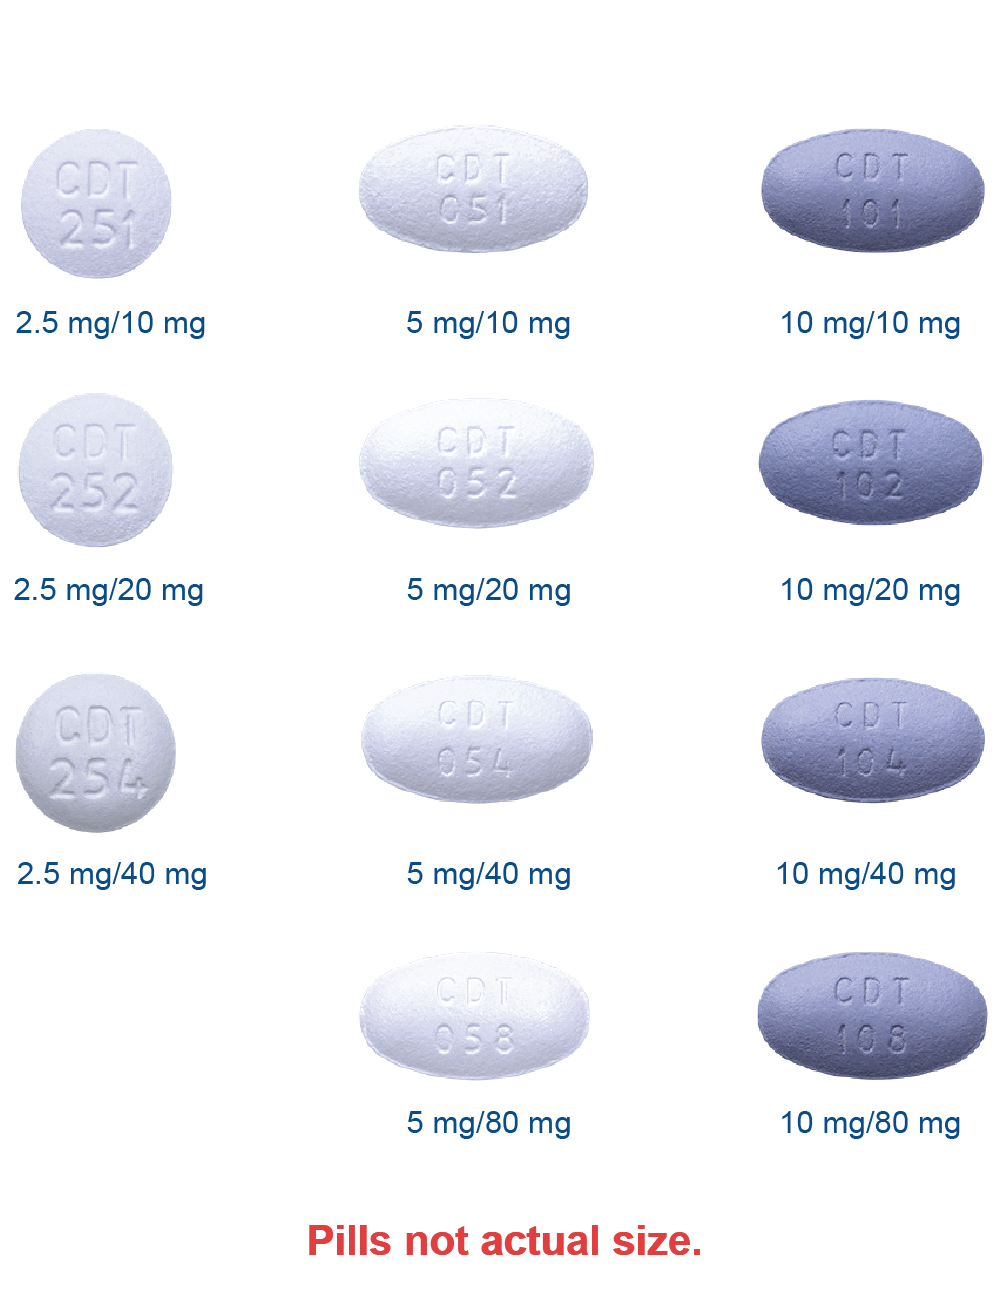 Image of pills in all available strengths